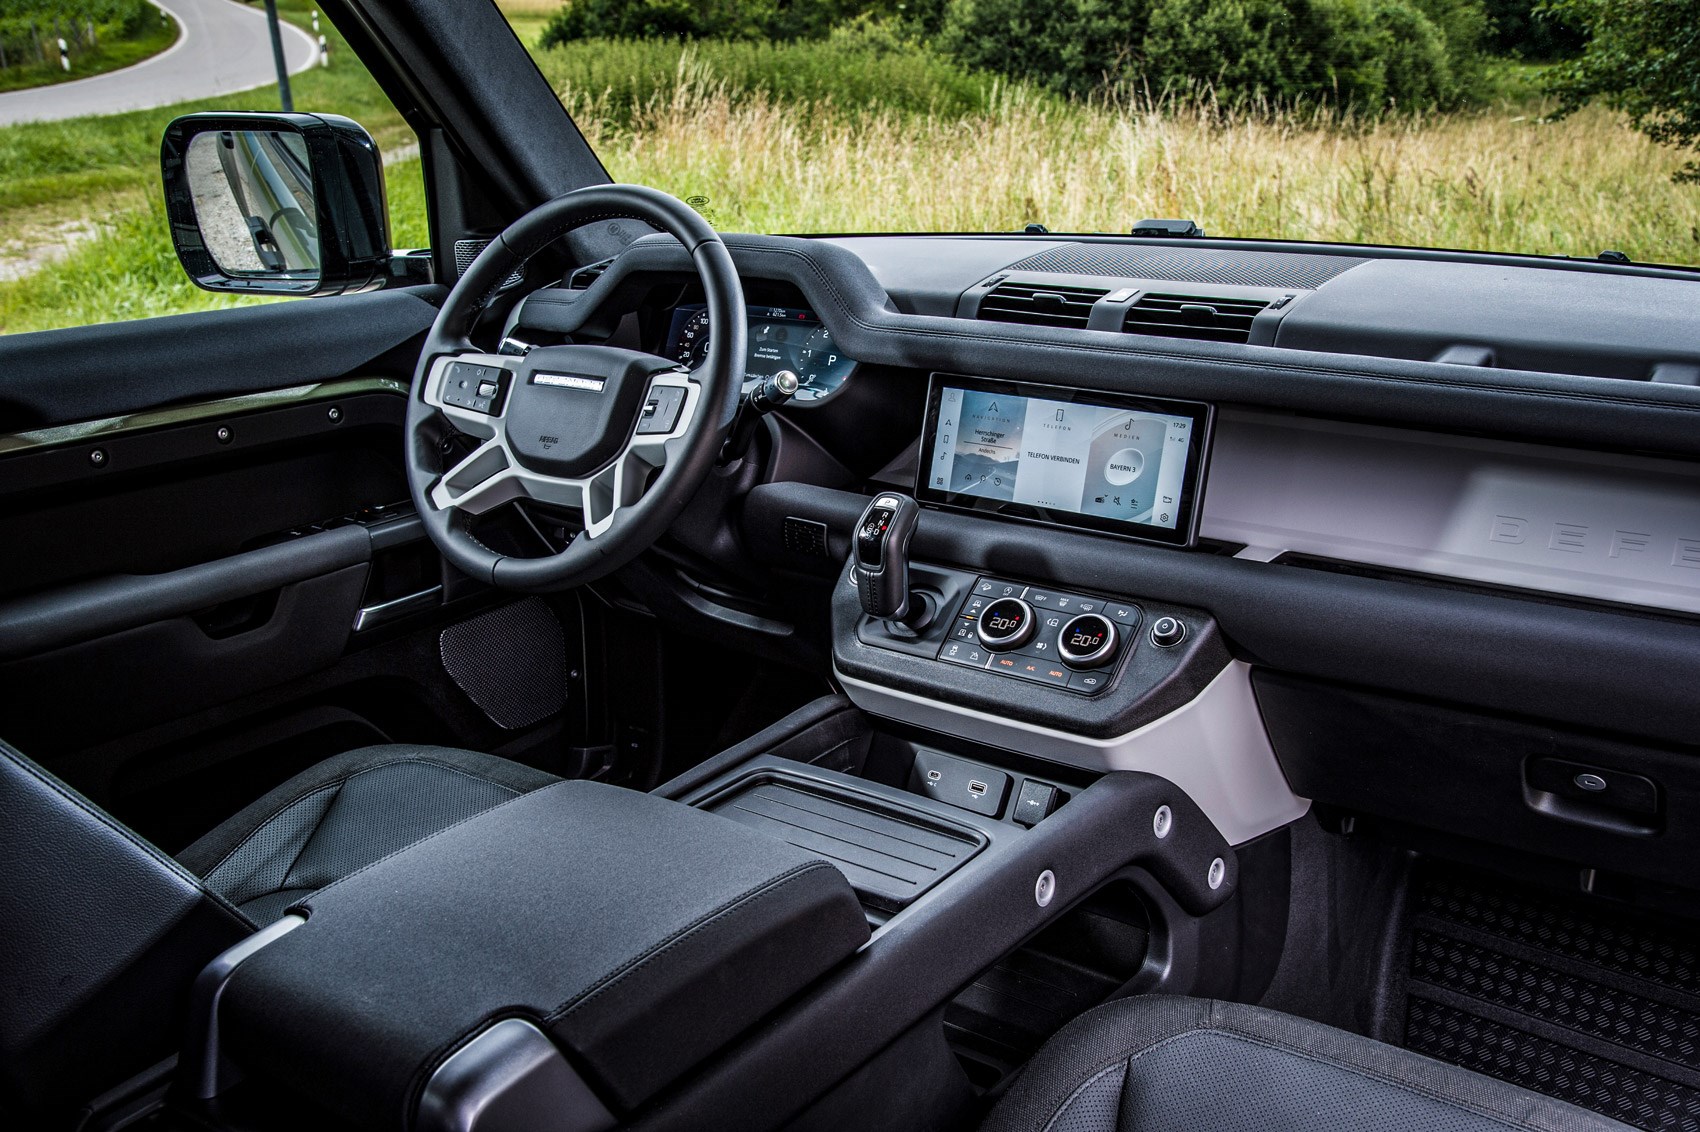 2021 Land Rover Defender 90 Review: Off-Road With Style and Simplicity